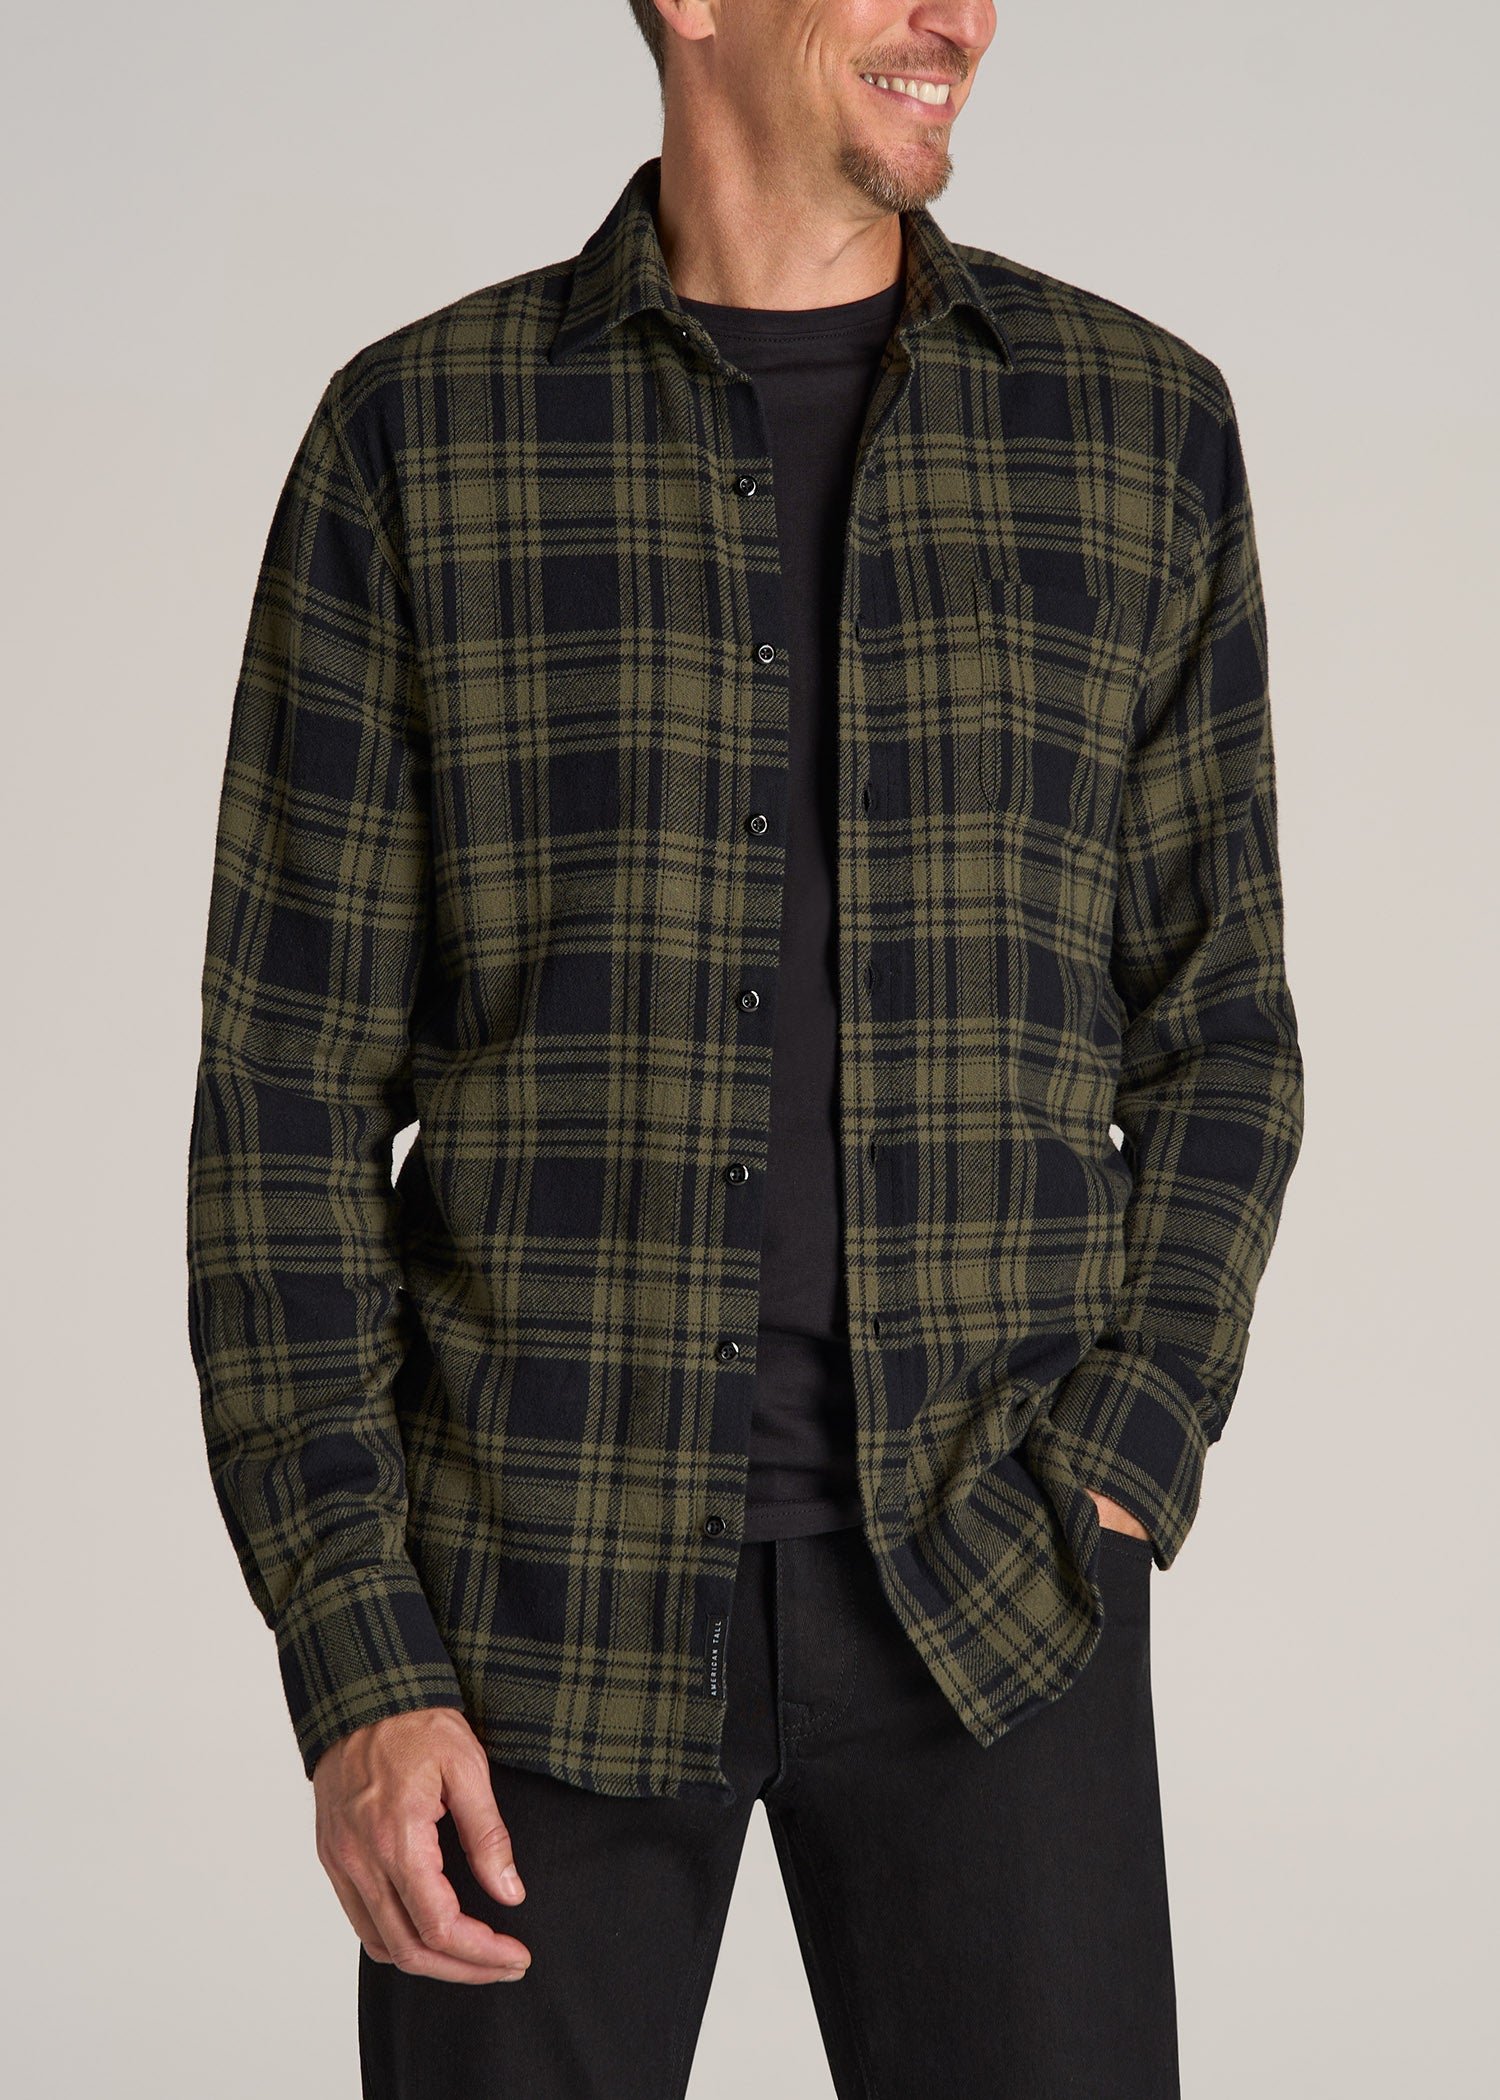 Nelson Flannel Shirt for Tall Men in Black and Green Plaid M / Semi Tall / Black and Green Plaid